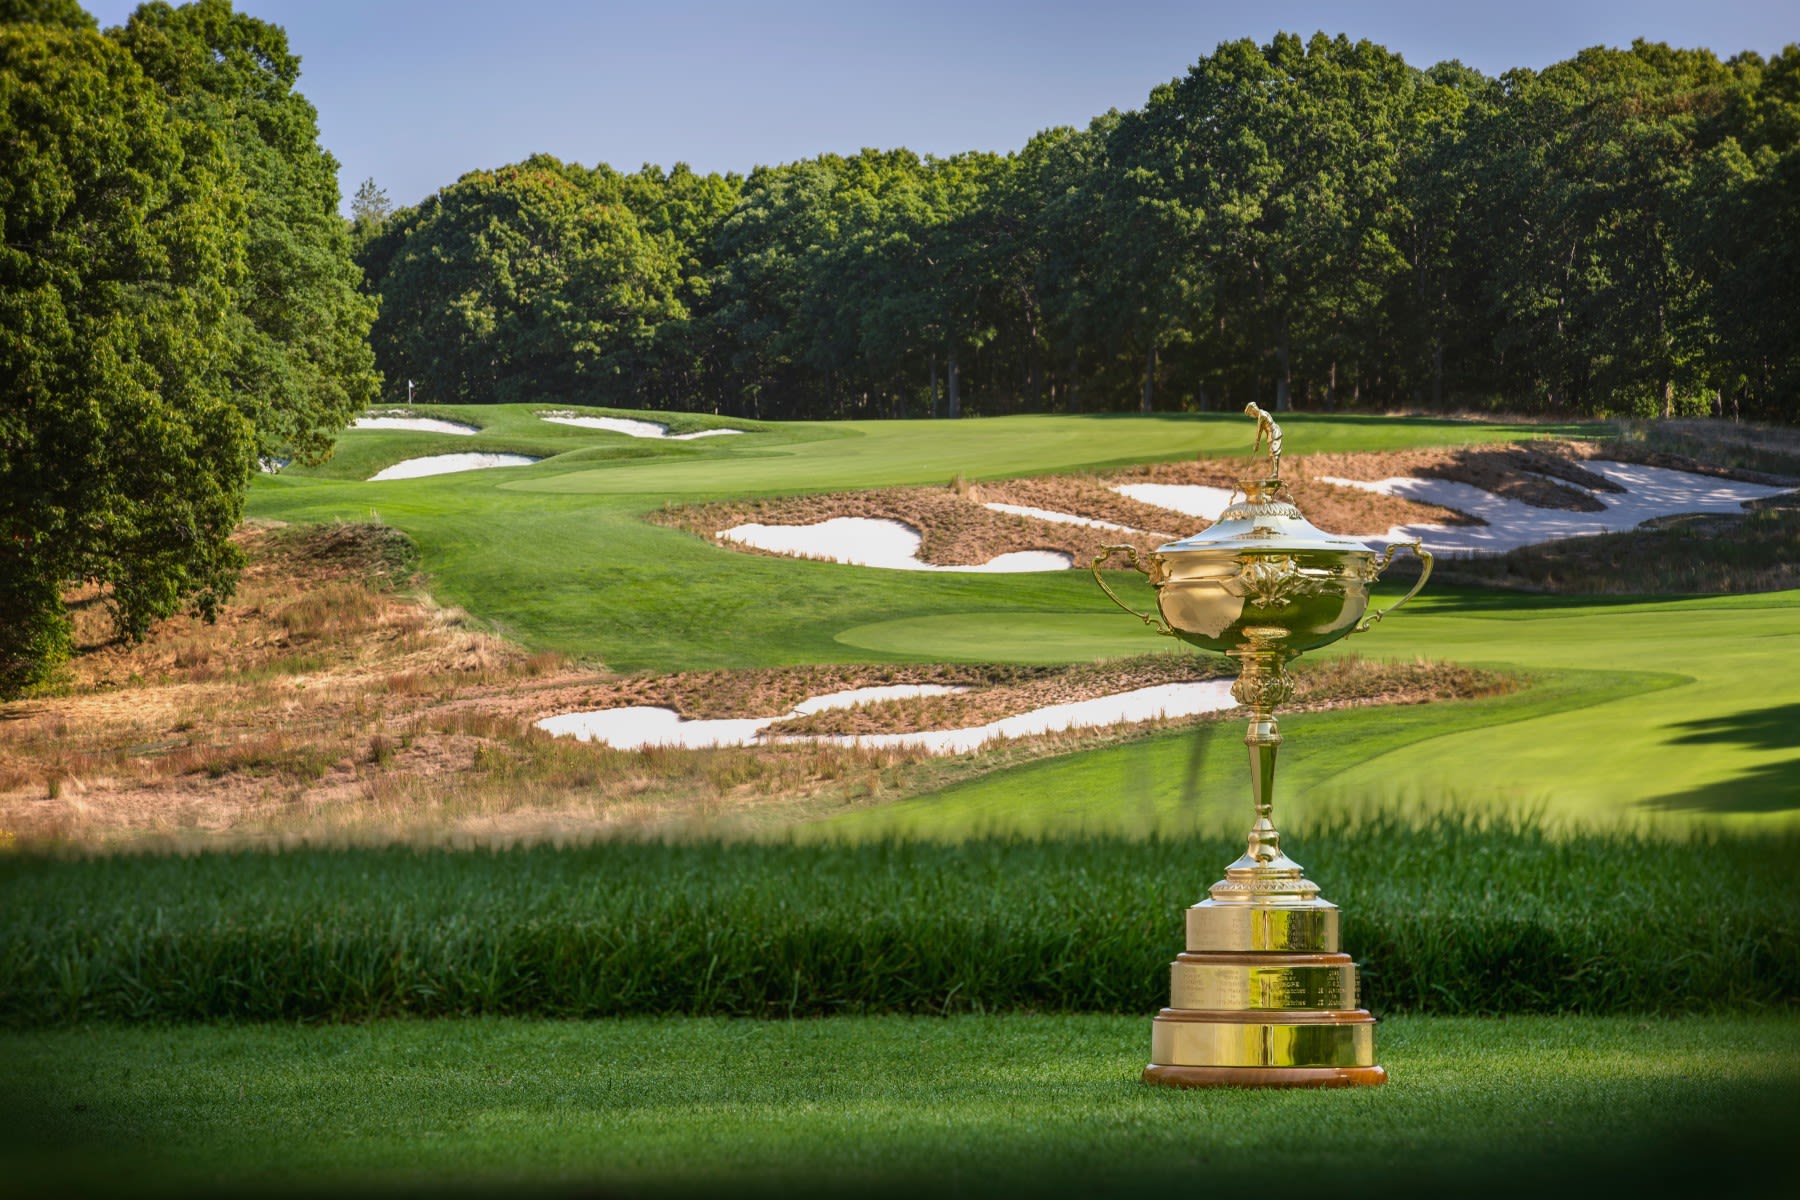 The Ryder Cup will be played at Bethpage Black in 2025.